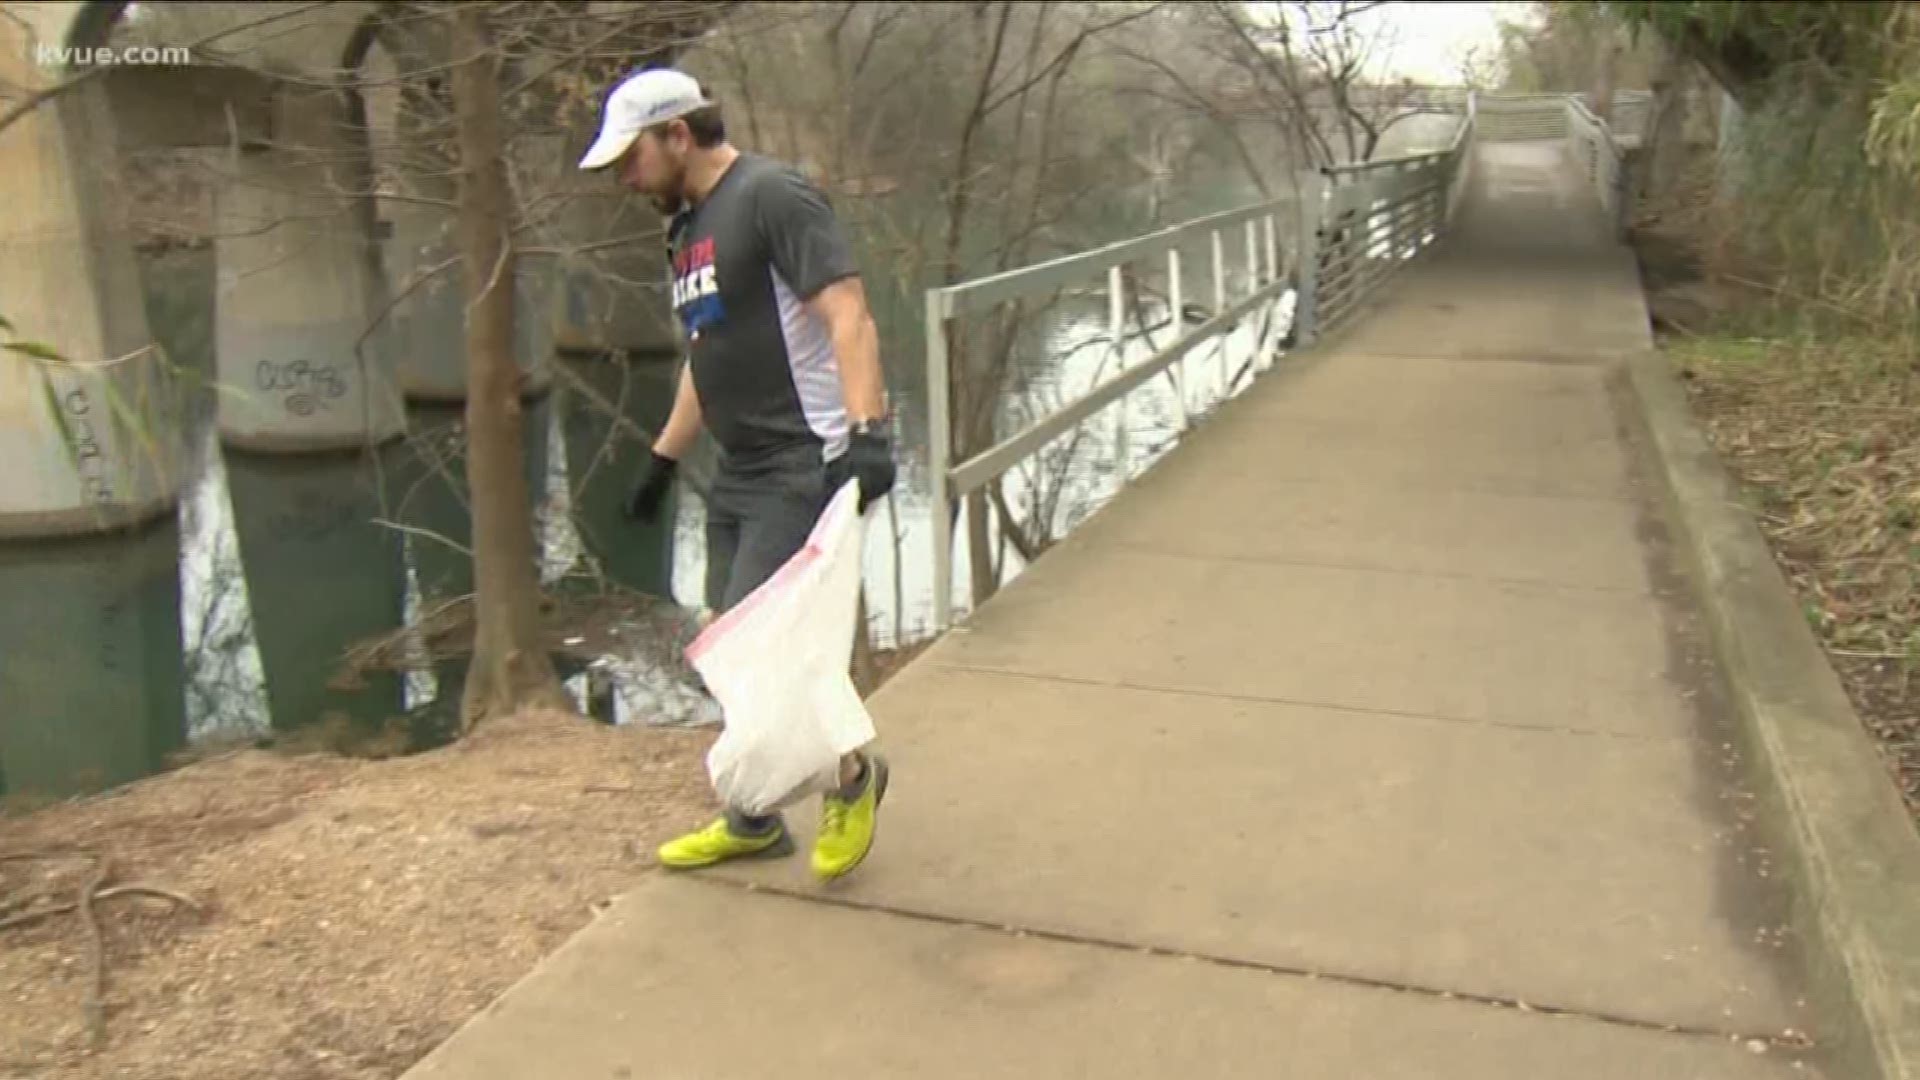 After noticing trash on the trail during a run, one Austin man decided he was going to do something about it. Now he's challenging people to follow in his footsteps.